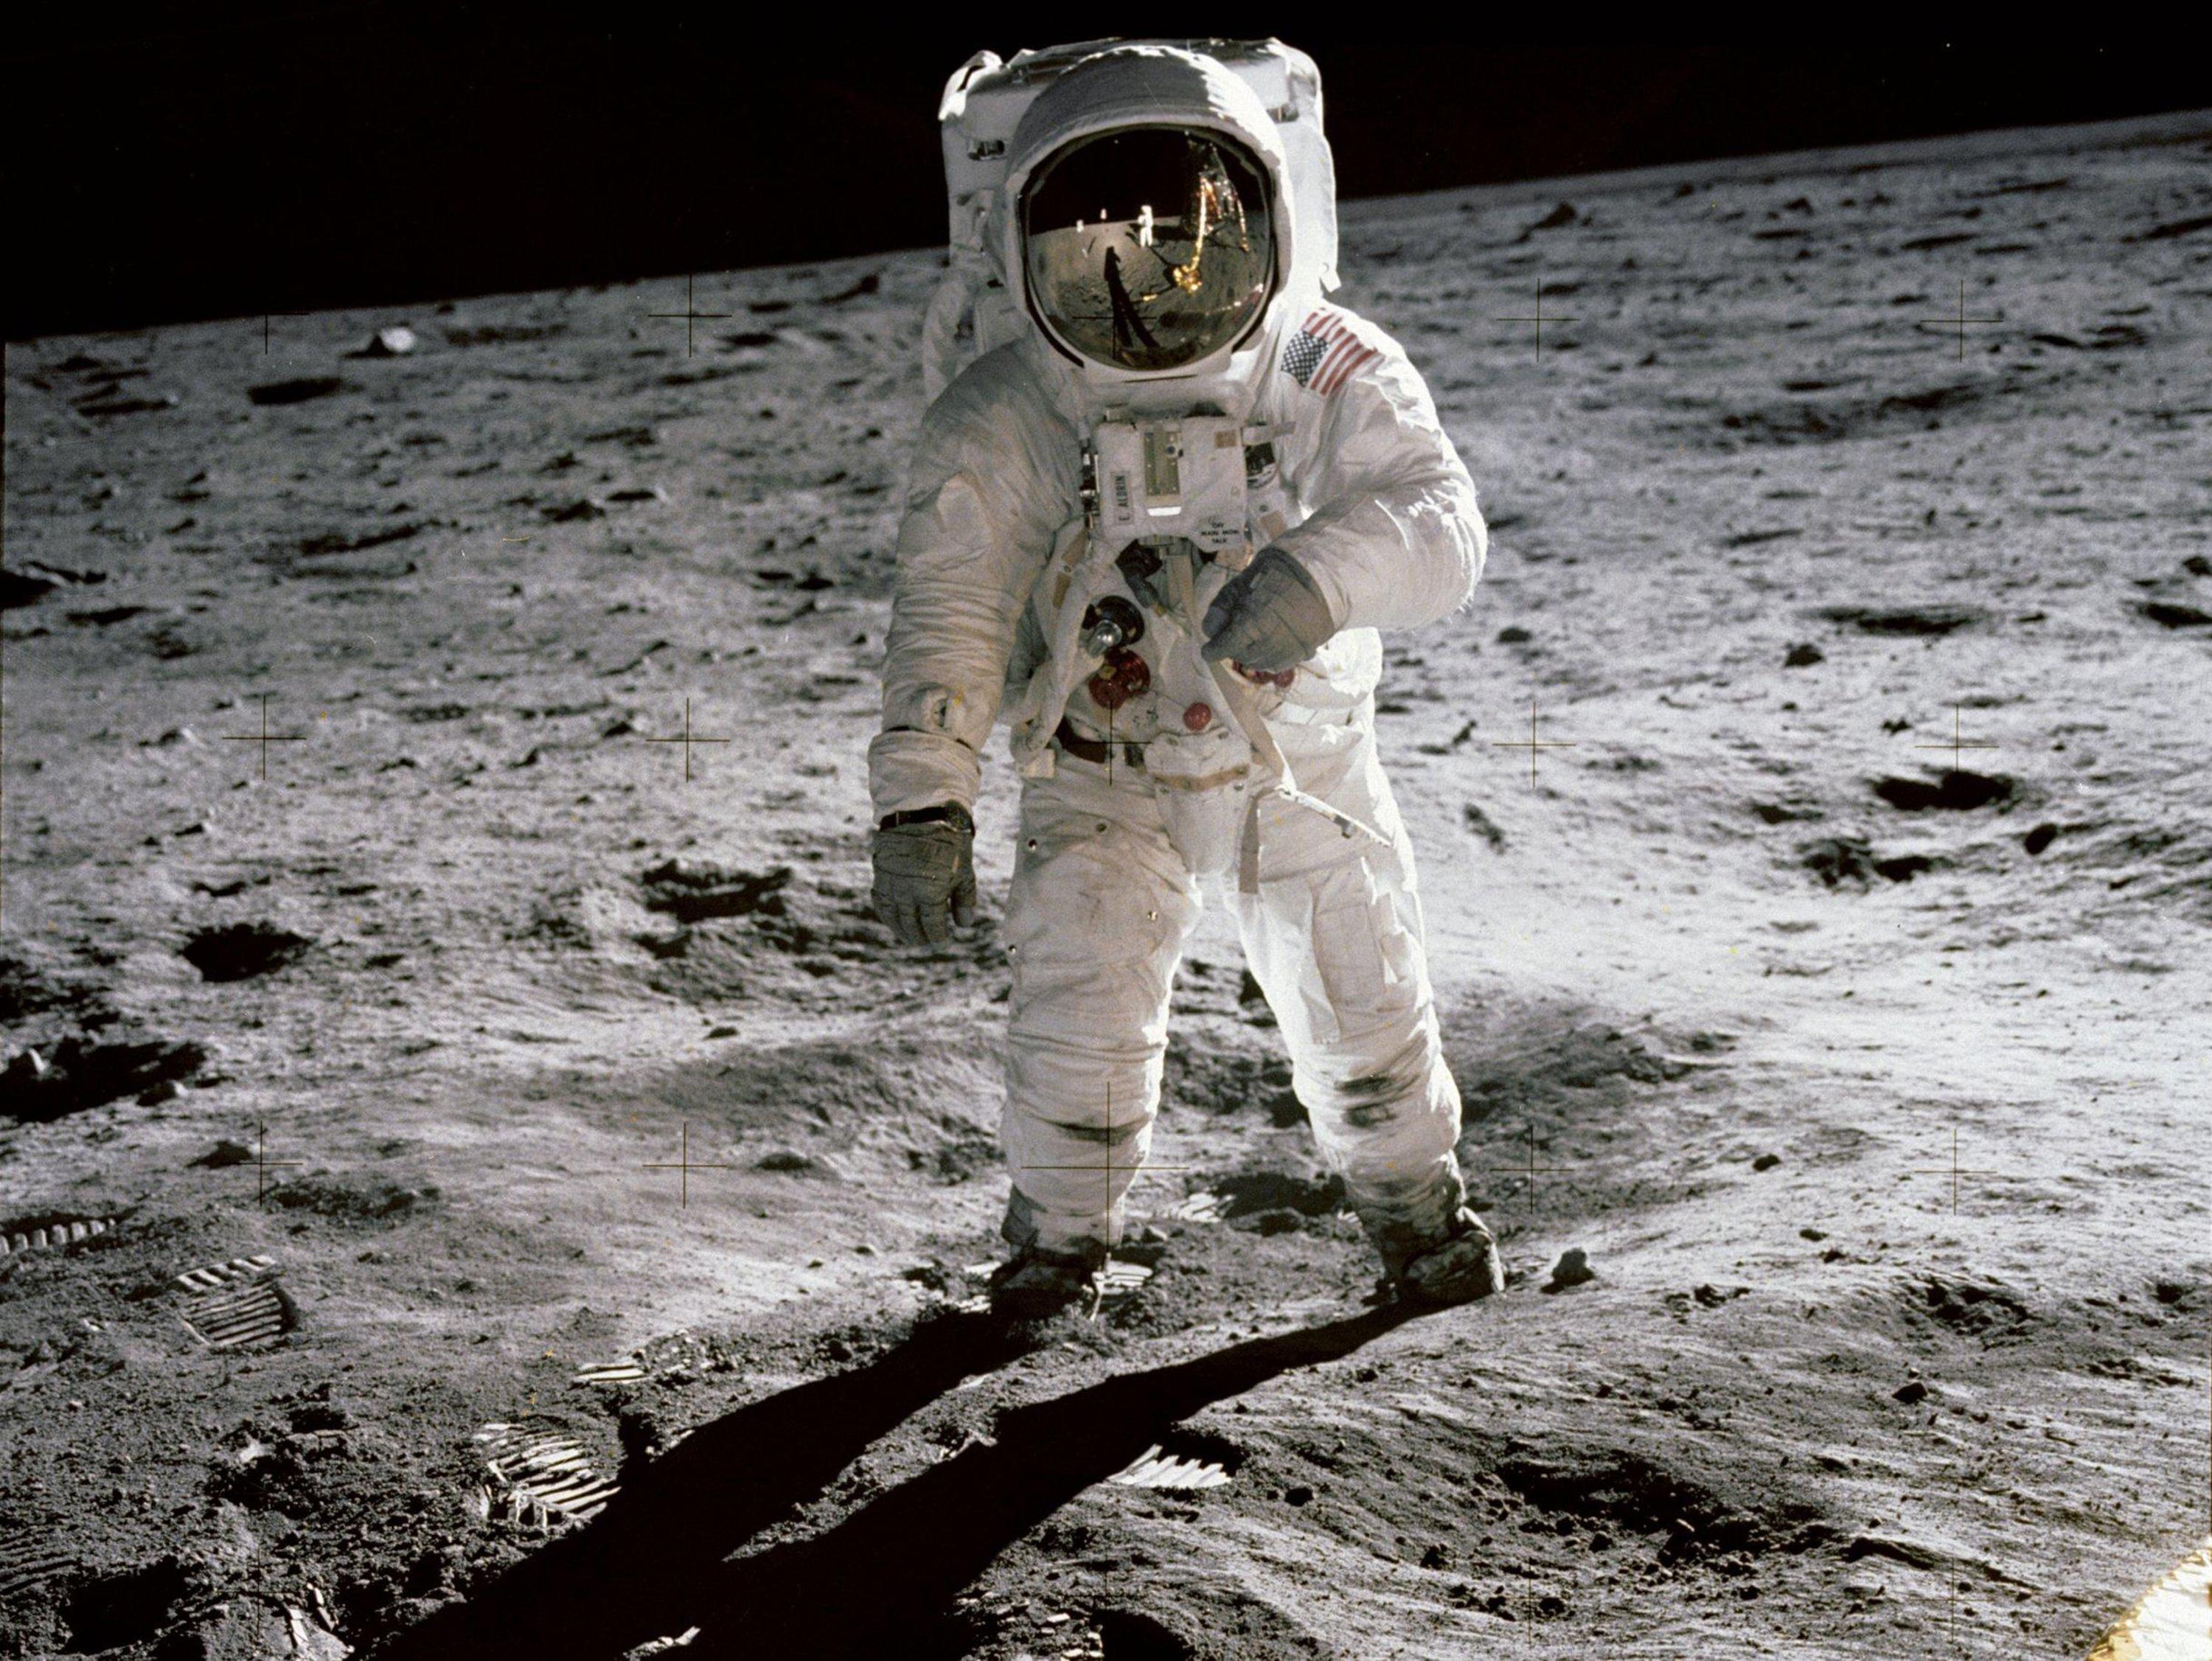 Archival image of Apollo 11 astronaut, connected to planetarium show on its anniversary